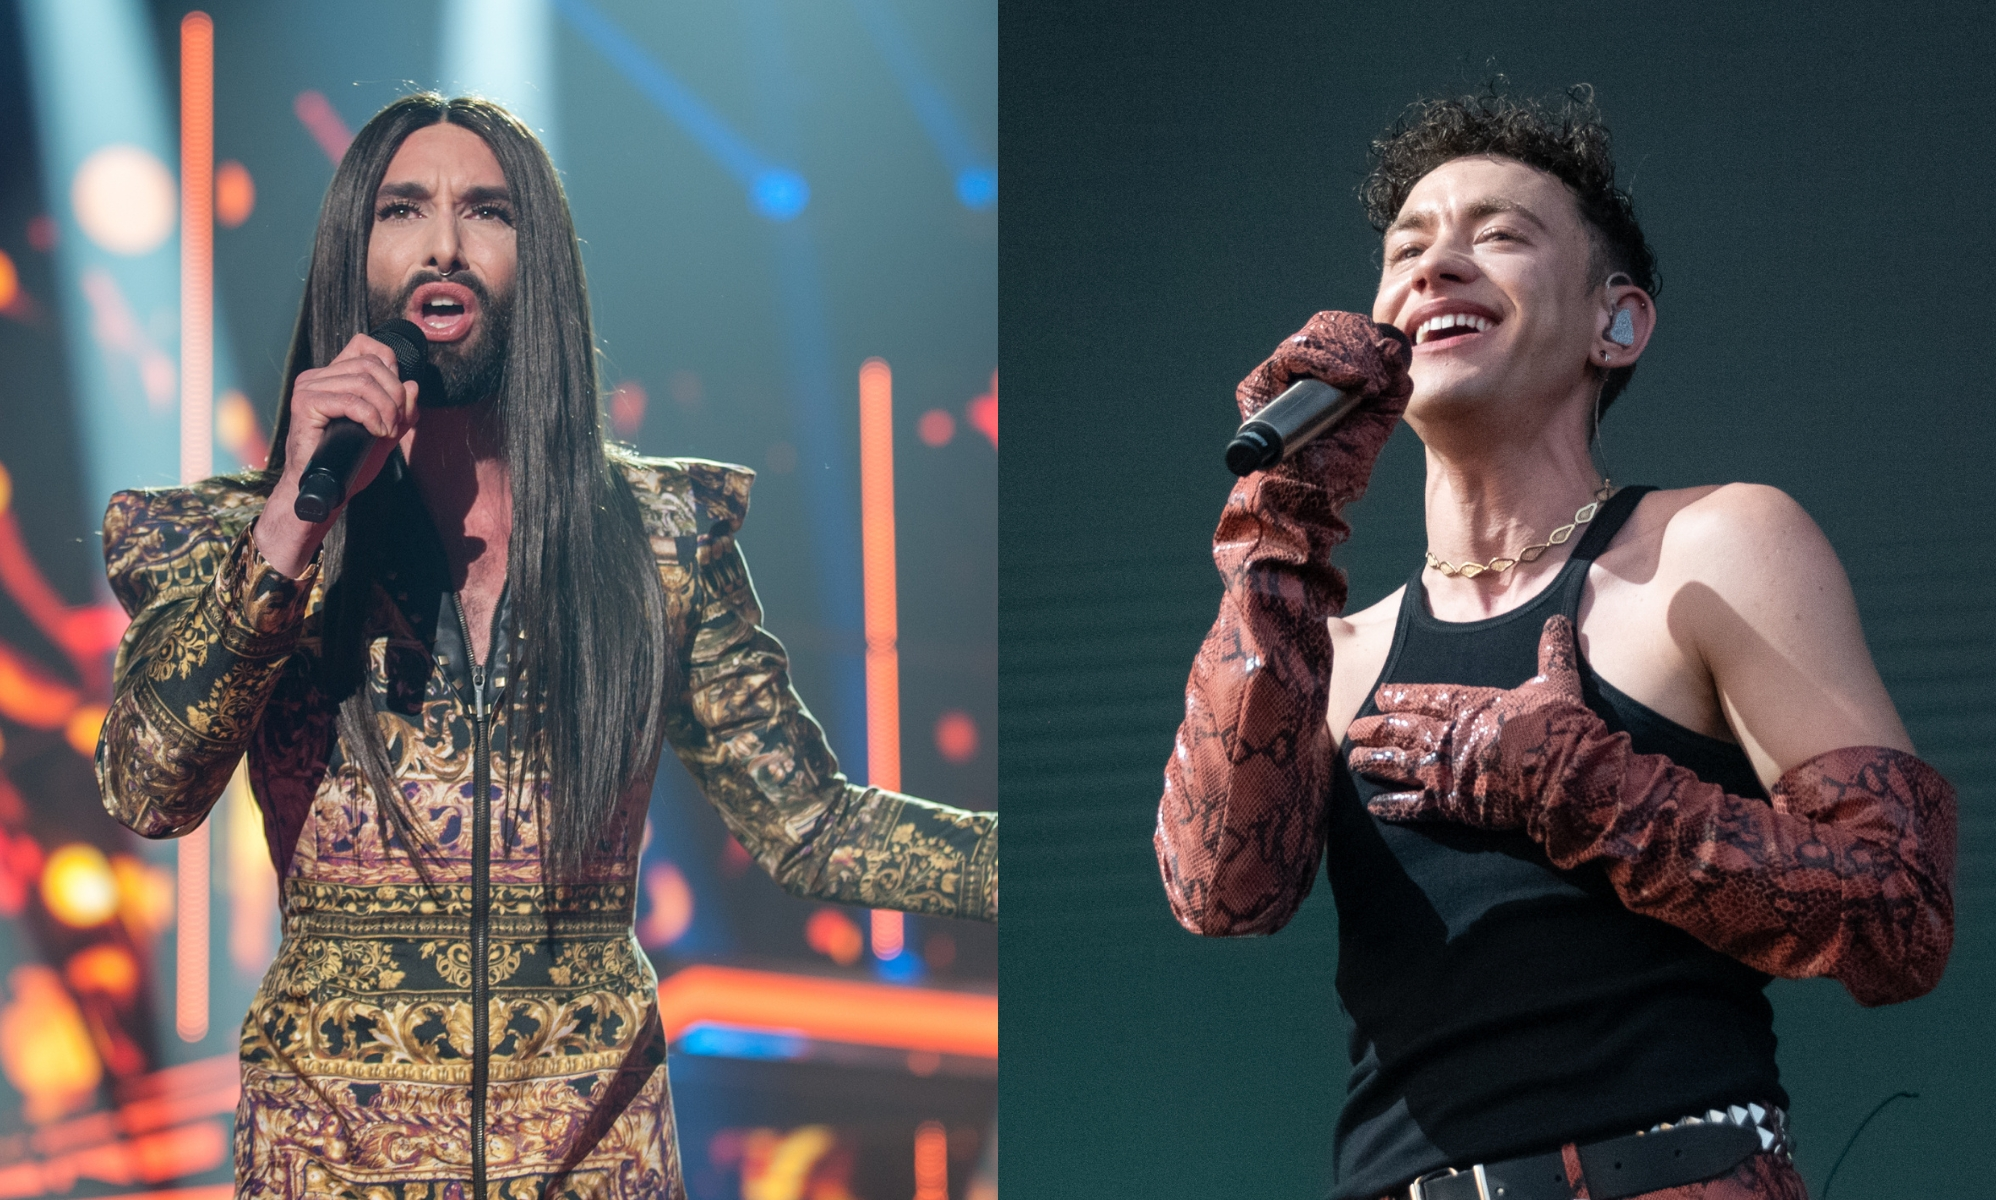 Let’s settle this once and for all: why do queer people love Eurovision so much?